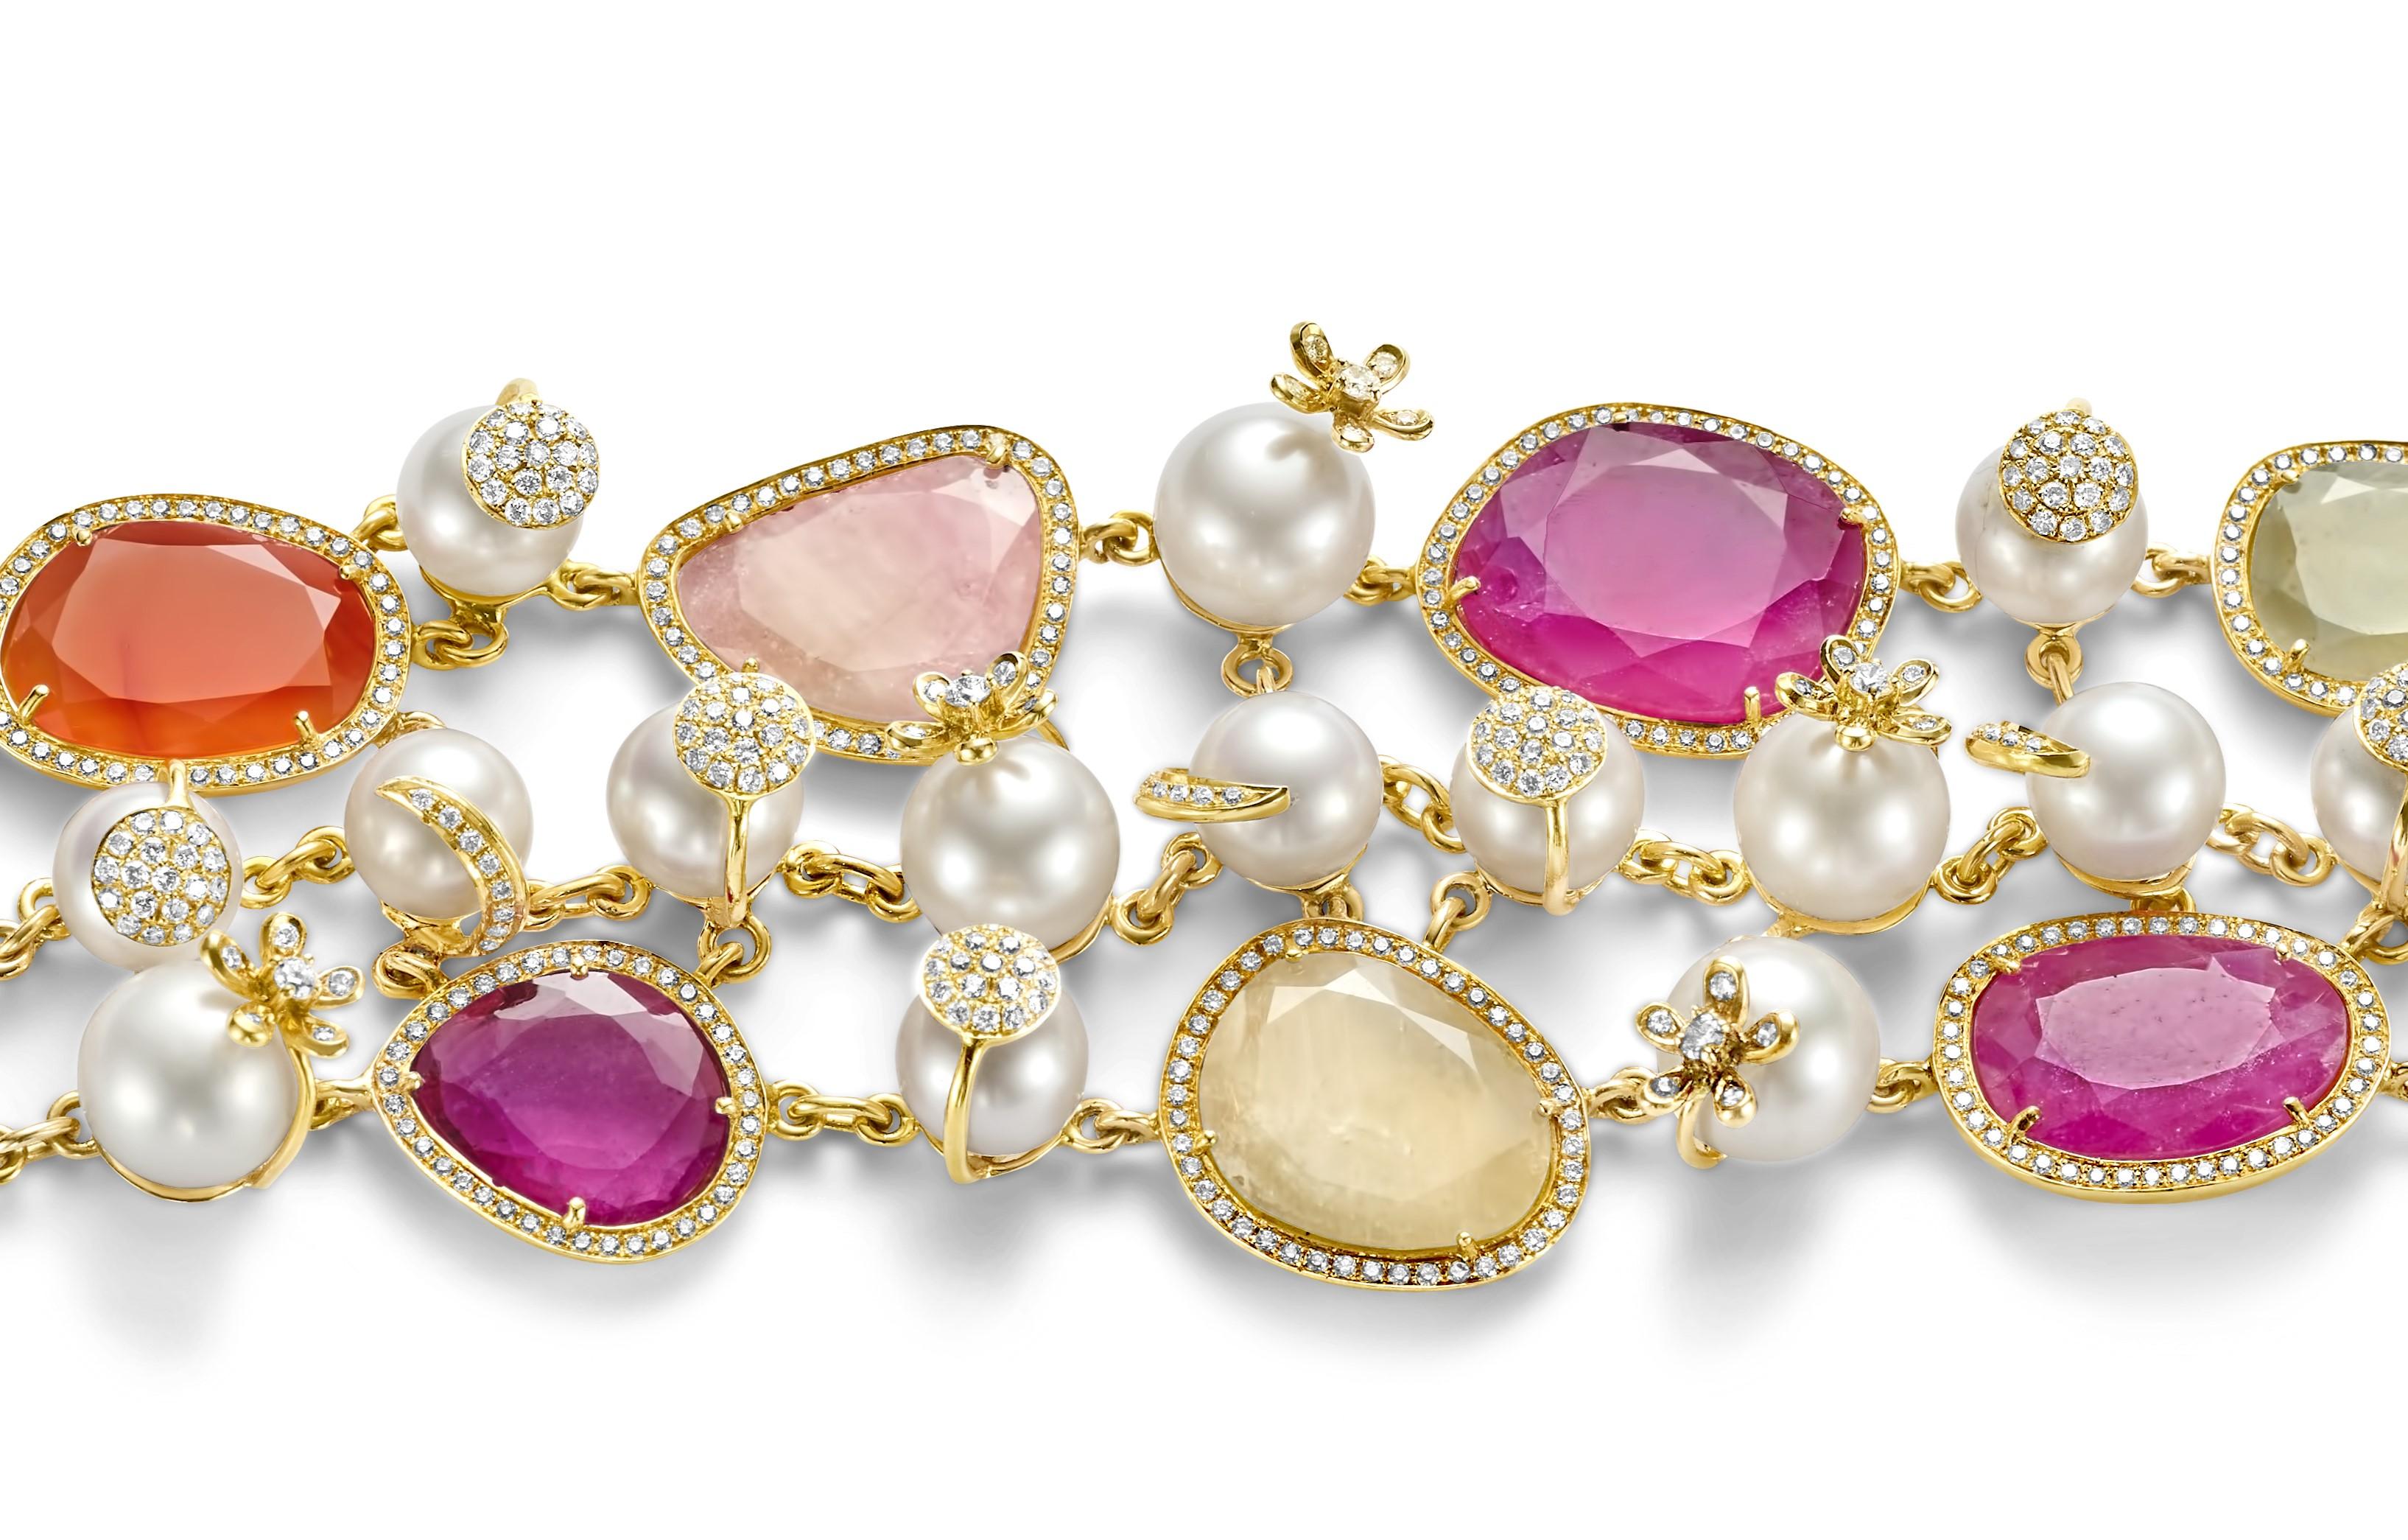 Magnificent Bracelet with 78.27 ct. Rubellite and Semi Precious Stones, Pearls & Diamonds

Diamonds: Brilliant cut diamonds in total 2.17 ct. 

Rubellite and semi precious stones in total 78.27 ct.

Pearls: 20 natural pearls

Material: 18kt Yellow